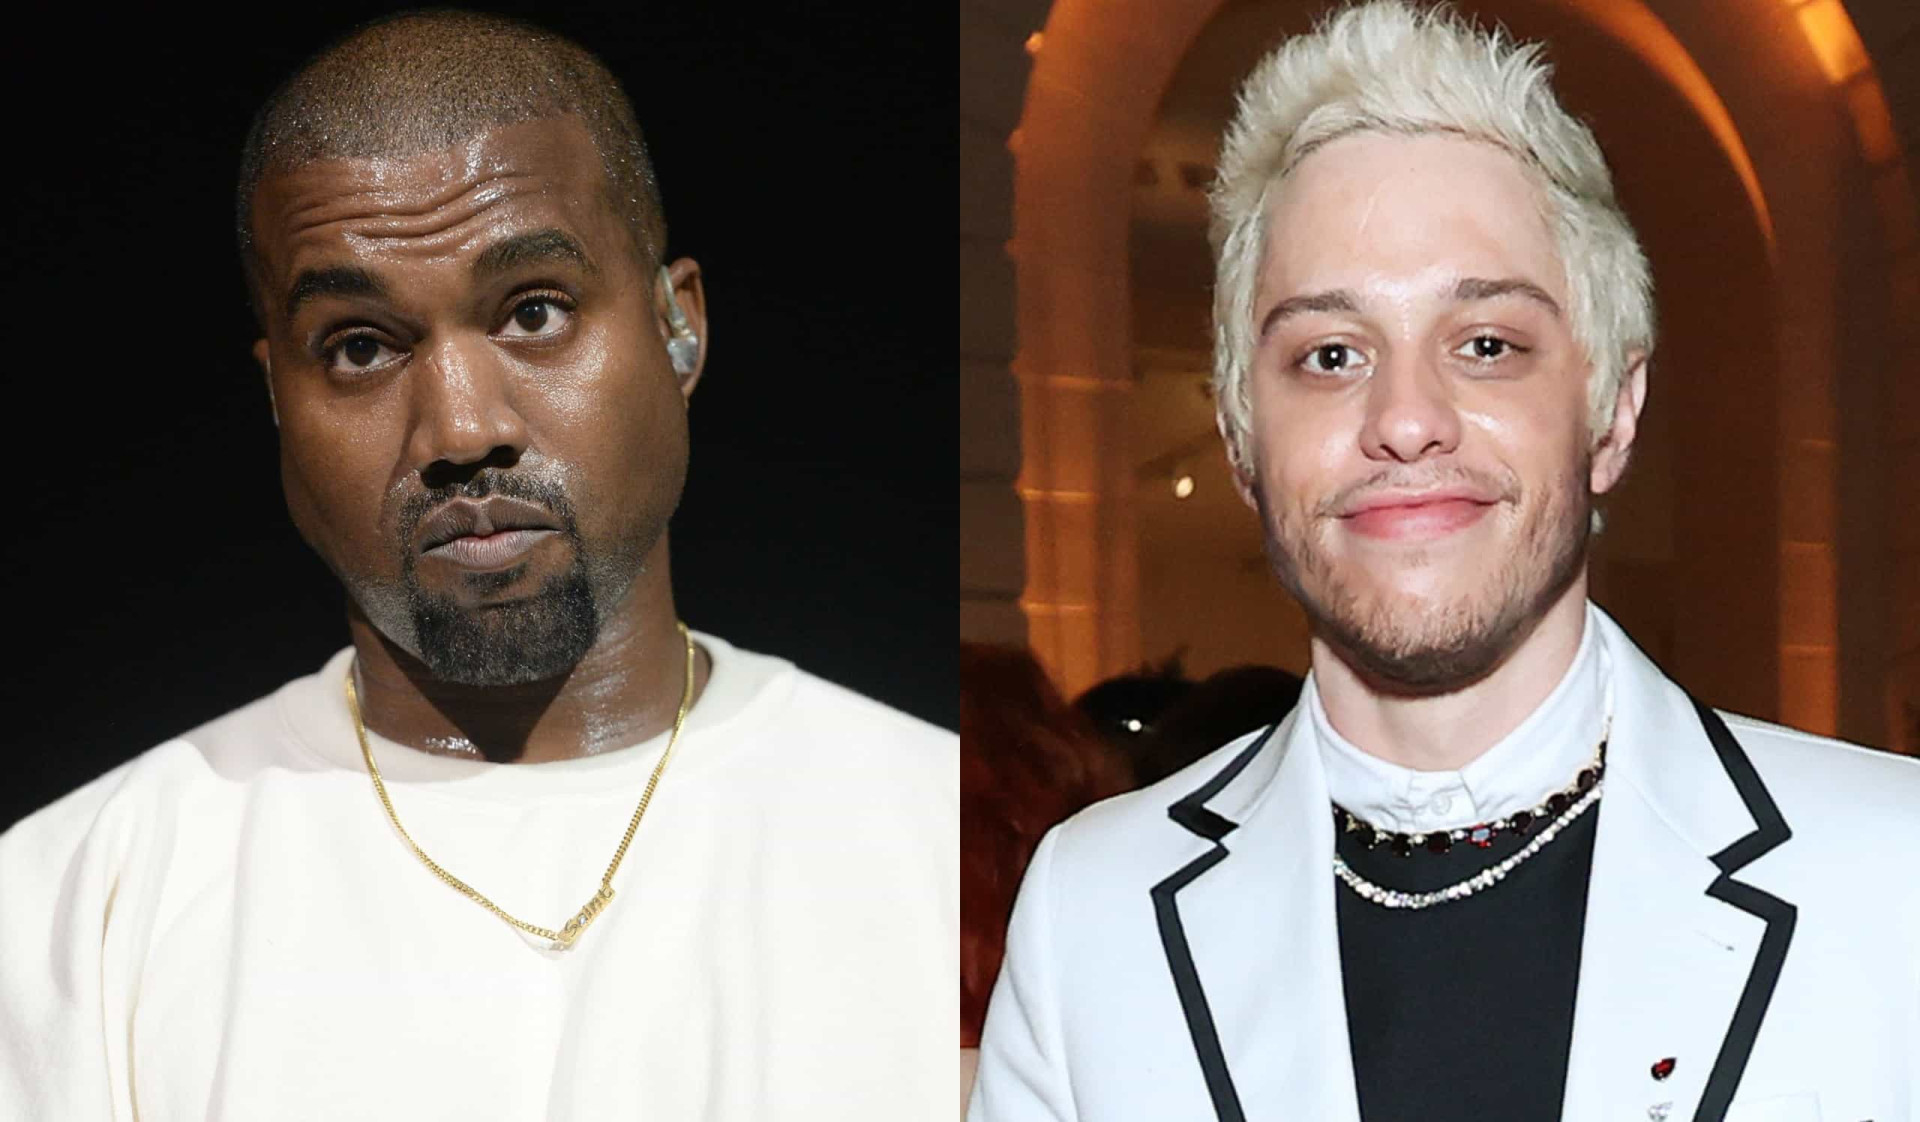 <p>After enduring months of public criticism, Davidson, who does not use social media, shared screenshots of messages he sent to Ye through Twitter. These messages were confirmed to be authentic by E! News. The exchange began on March 13 when Ye began expressing family-related grievances. <br><br>He asked Ye to "calm down" because "Kim is the literally the best mother I've ever met," adding, "I've decided that I'm not gonna let you treat us this way anymore and I'm done being quiet. Grow ... up." When Ye asked where he was, Davidson replied with a photo of himself laying down and wrote, "In bed with your wife." He continued, "You don't scare me bro ... It's so sad to watch you ruin ur legacy on the daily," he wrote, while offering to meet in LA to talk things out between them. Ye told him to come to Sunday Service but Davidson said he didn't want the press. "What you are doing to your family is dangerous and going to scar them for life. Please handle these matters privately bro I beg you."</p><p>You may also like:<a href="https://www.starsinsider.com/n/423555?utm_source=msn.com&utm_medium=display&utm_campaign=referral_description&utm_content=570915en-en"> Utensils and eating etiquette around the world</a></p>